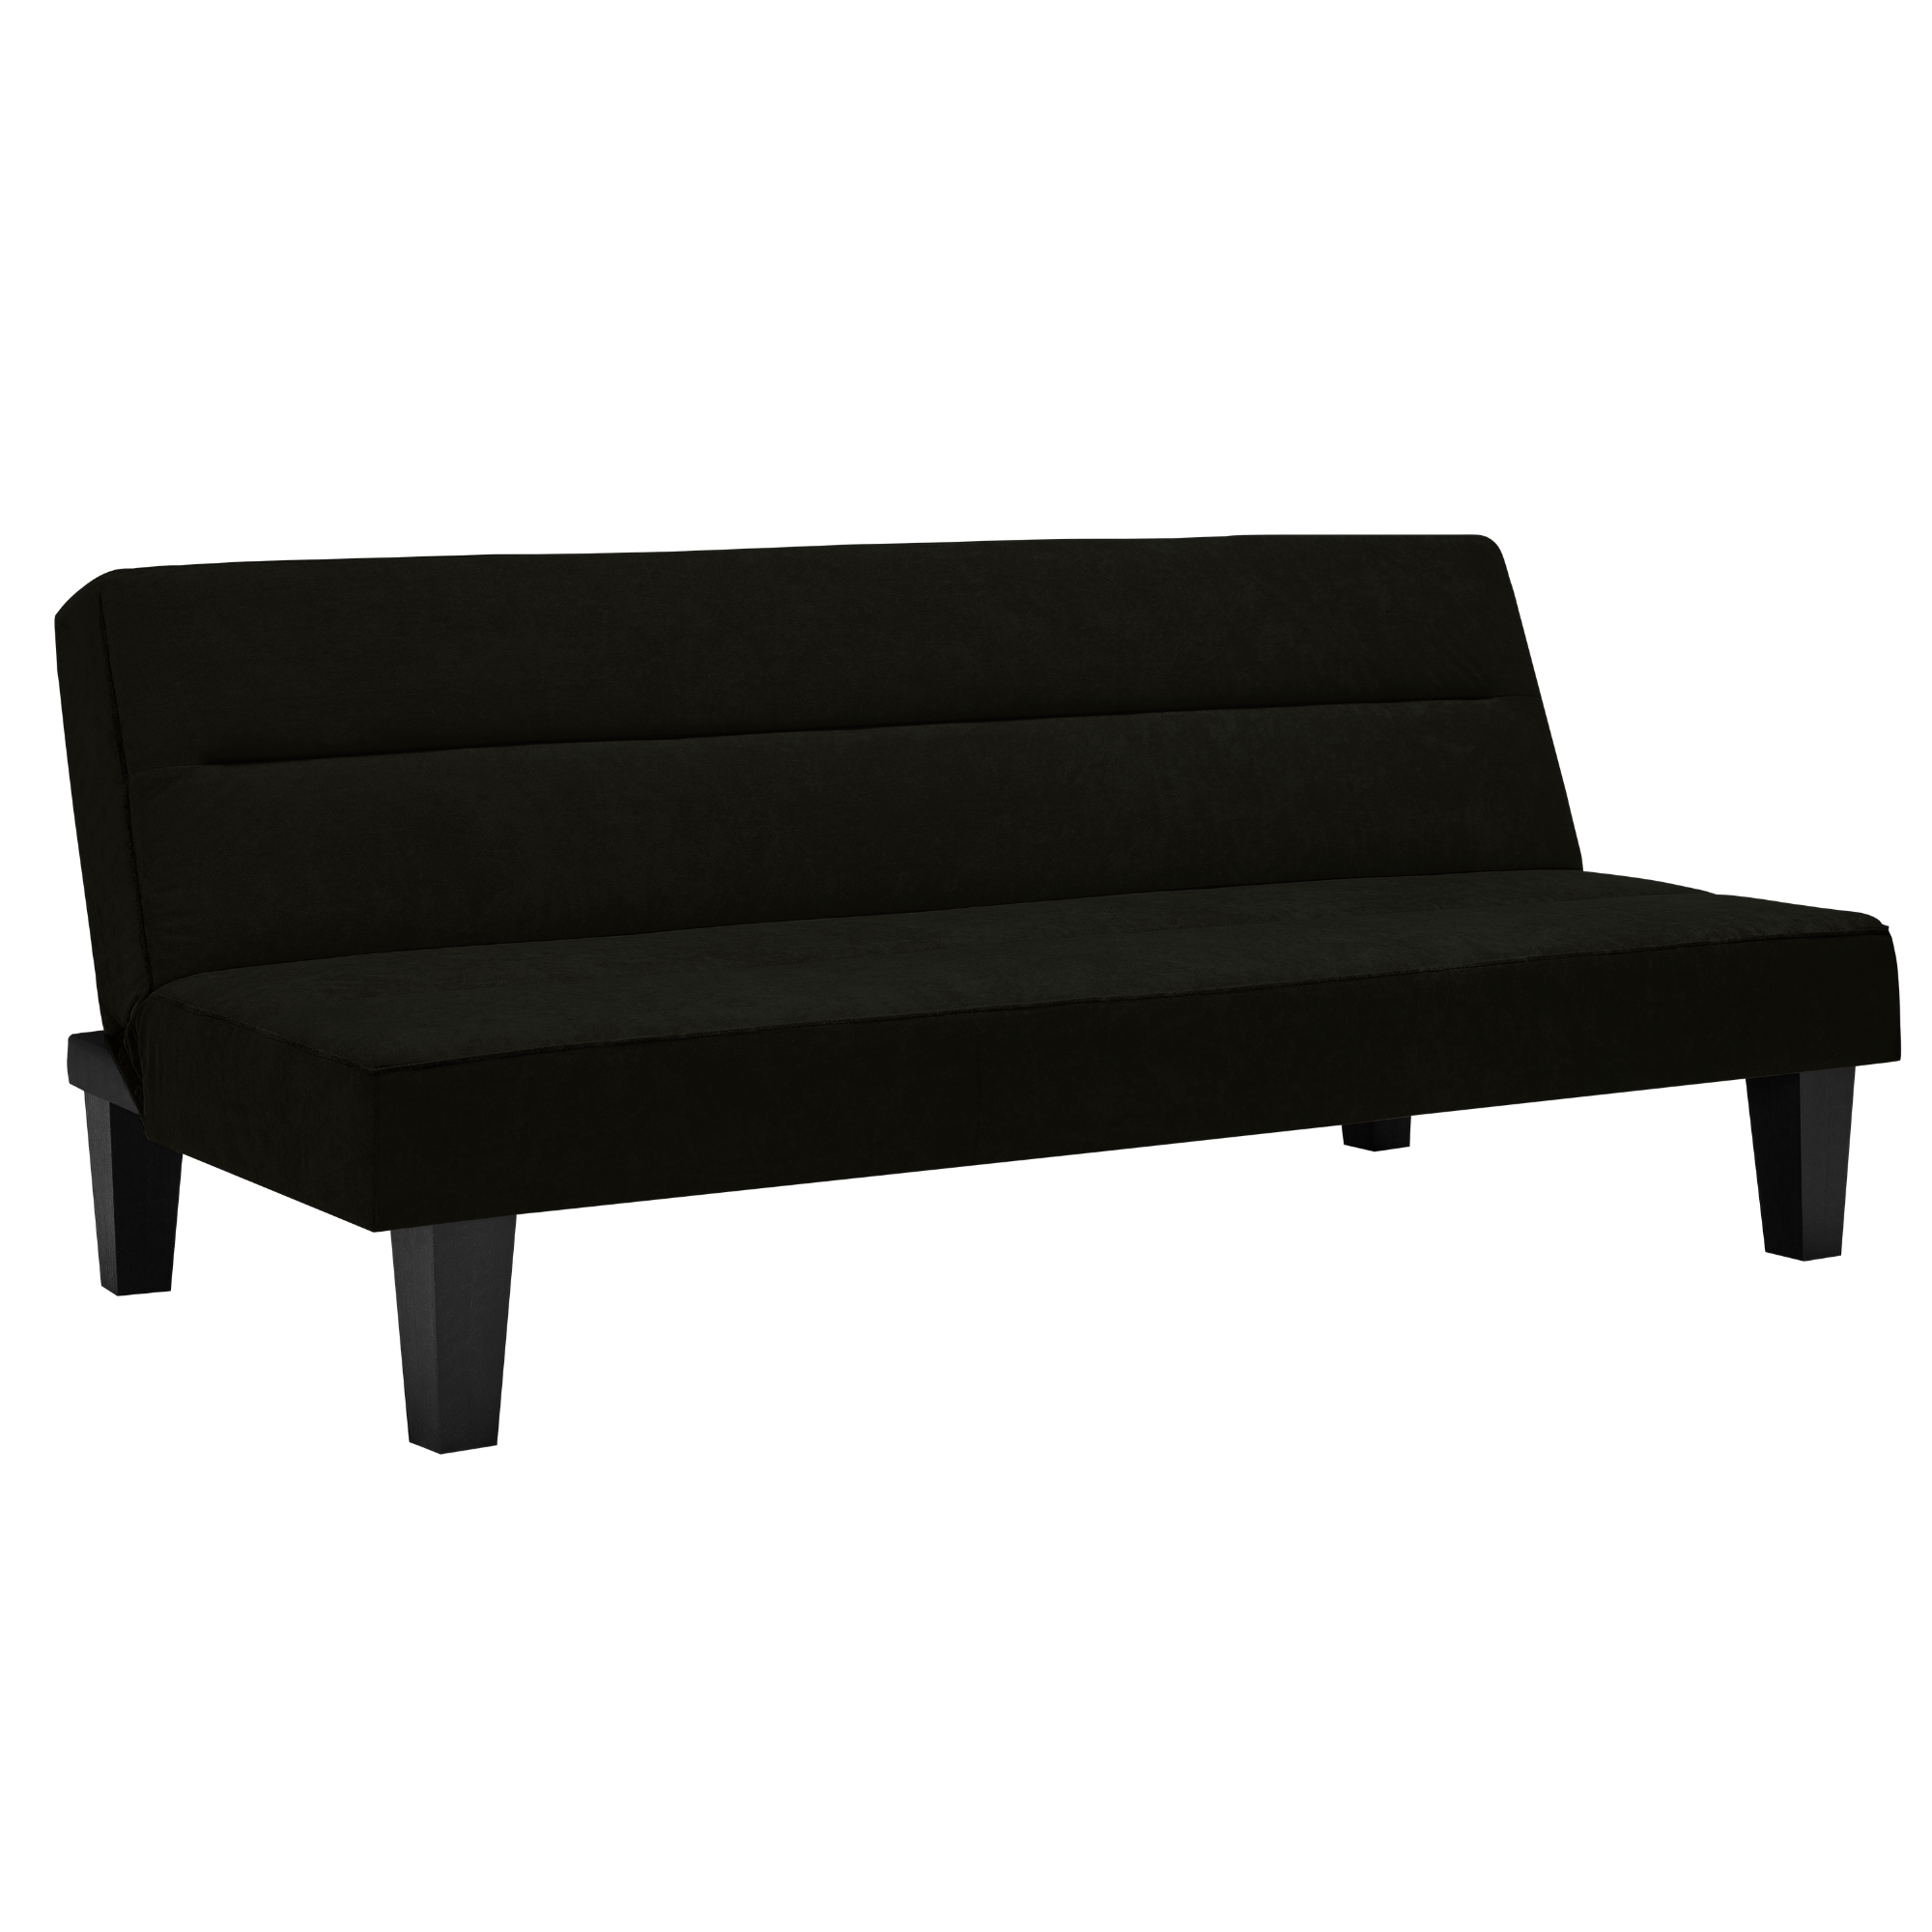 DHP Kebo Futon with Microfiber Cover, Black - image 4 of 15